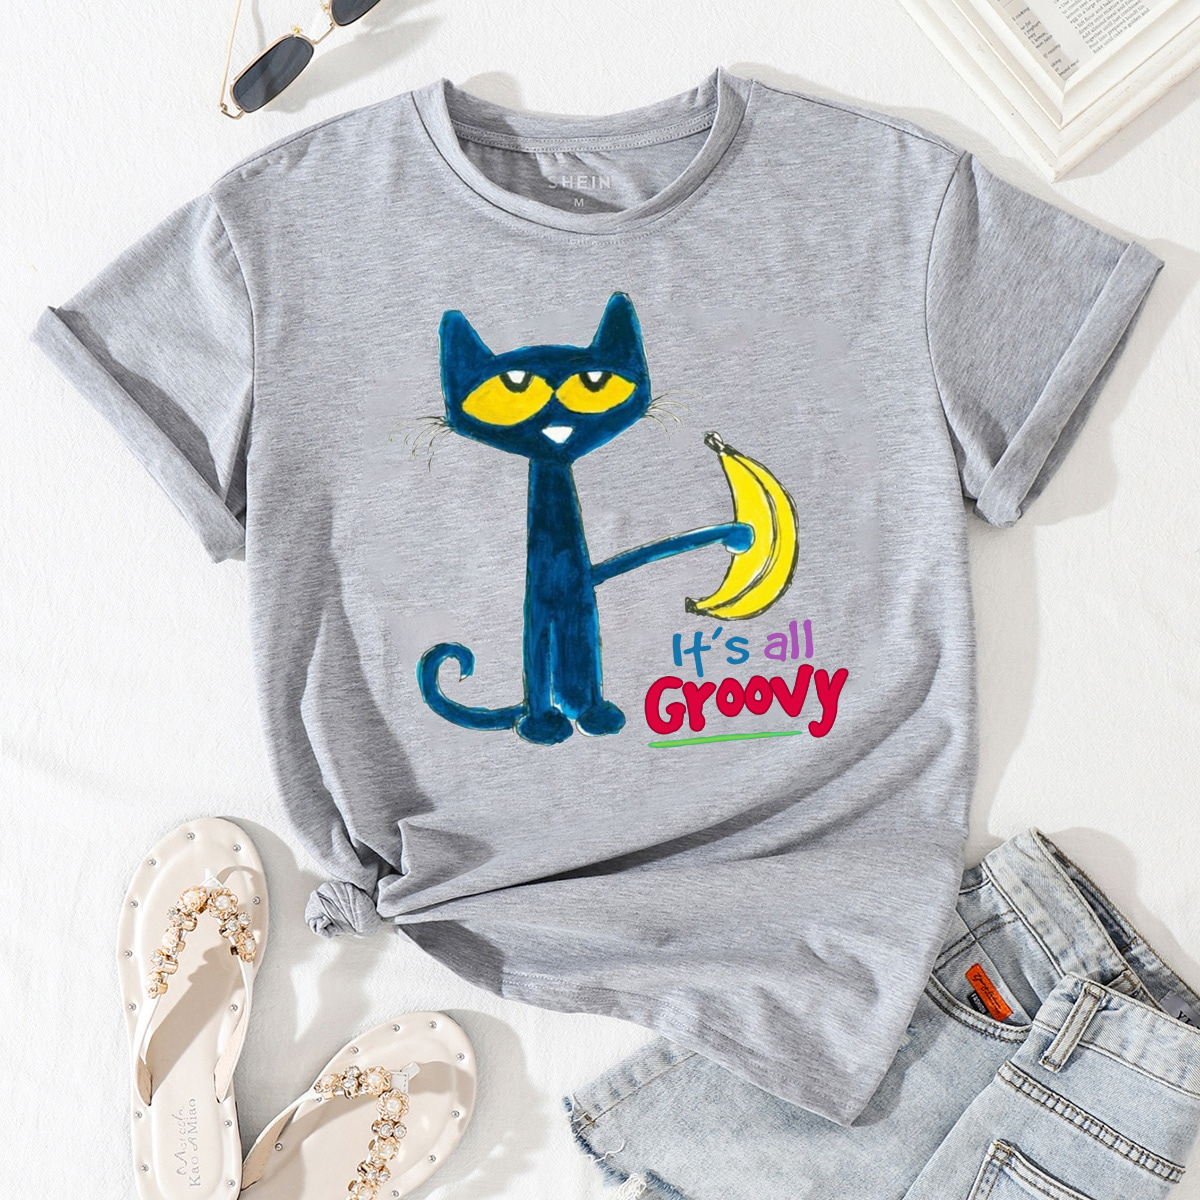 Pete The Cat Its All Good In Christmas Shirt, Watercolor Pete the Cat Sweatshirt Hoodies, Holiday Merry Xmas Noel Family Gift